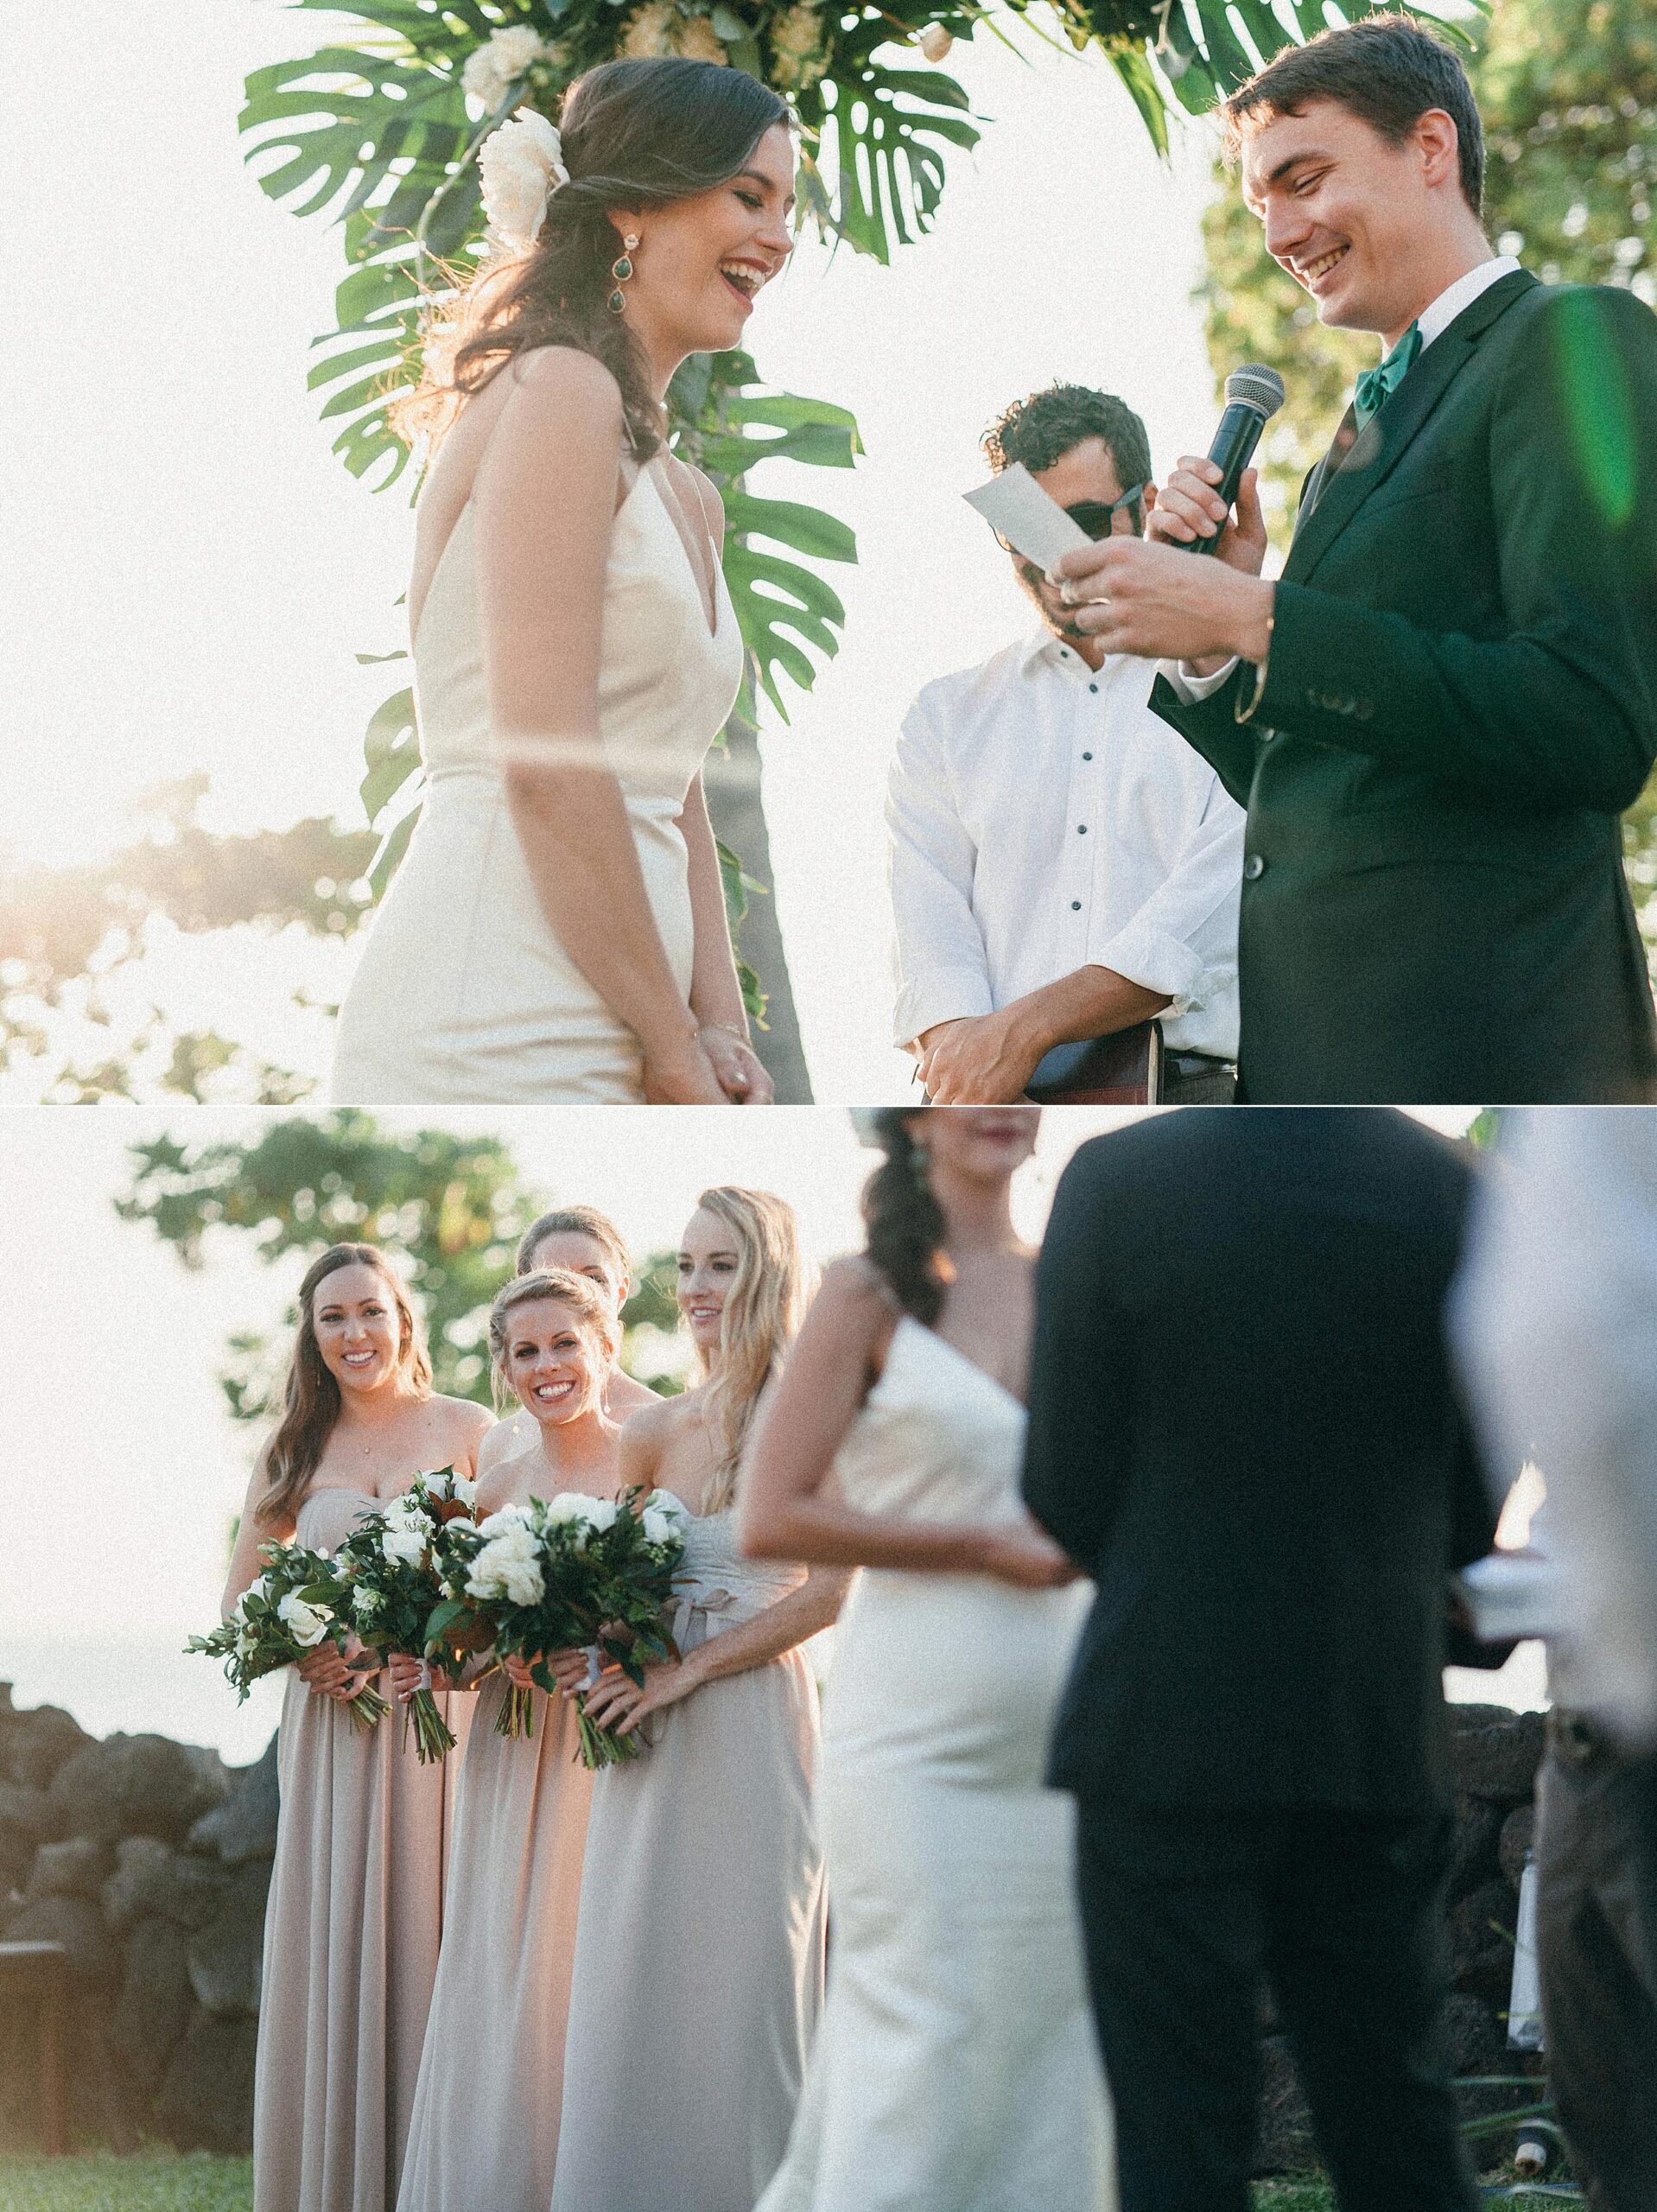 Kona-Big-Island-Hawaii-New-Years-Eve-Wedding-with-Ceremony-at-Living-Stones-Church-and-Reception-at-Daylight-Mind-Coffee_0014.jpg